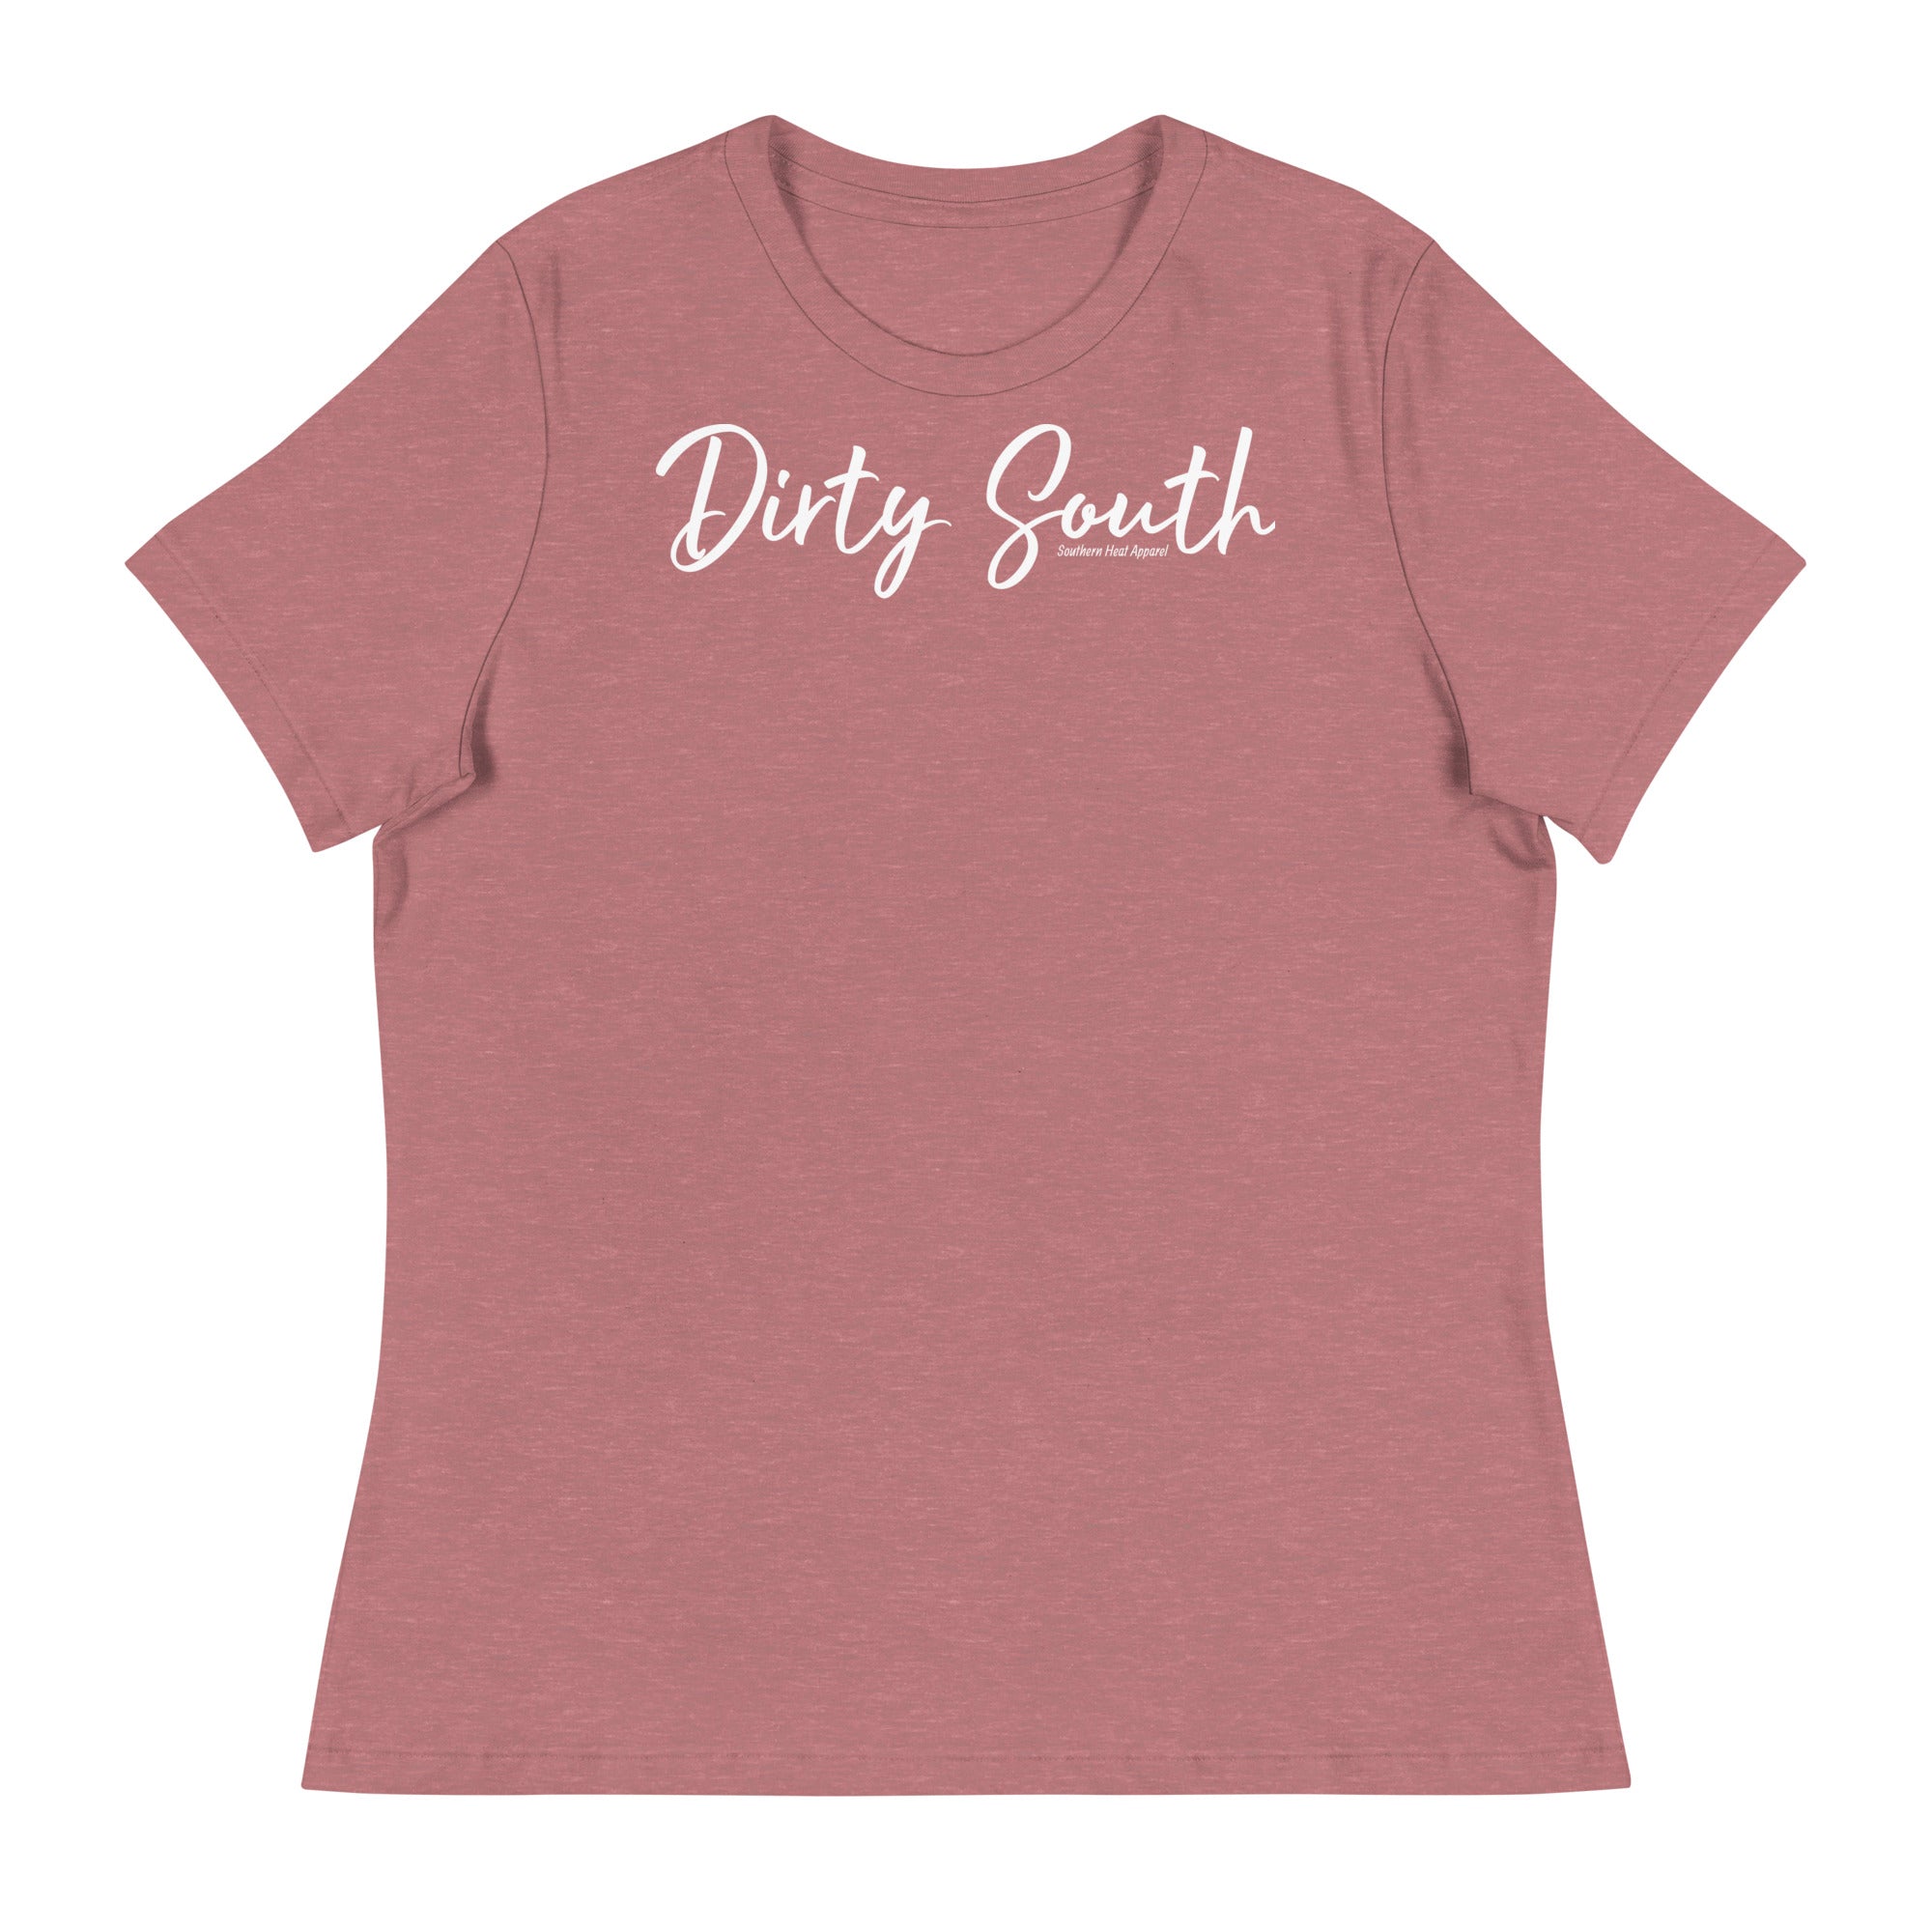 Dirty South-Women's Relaxed T-Shirt